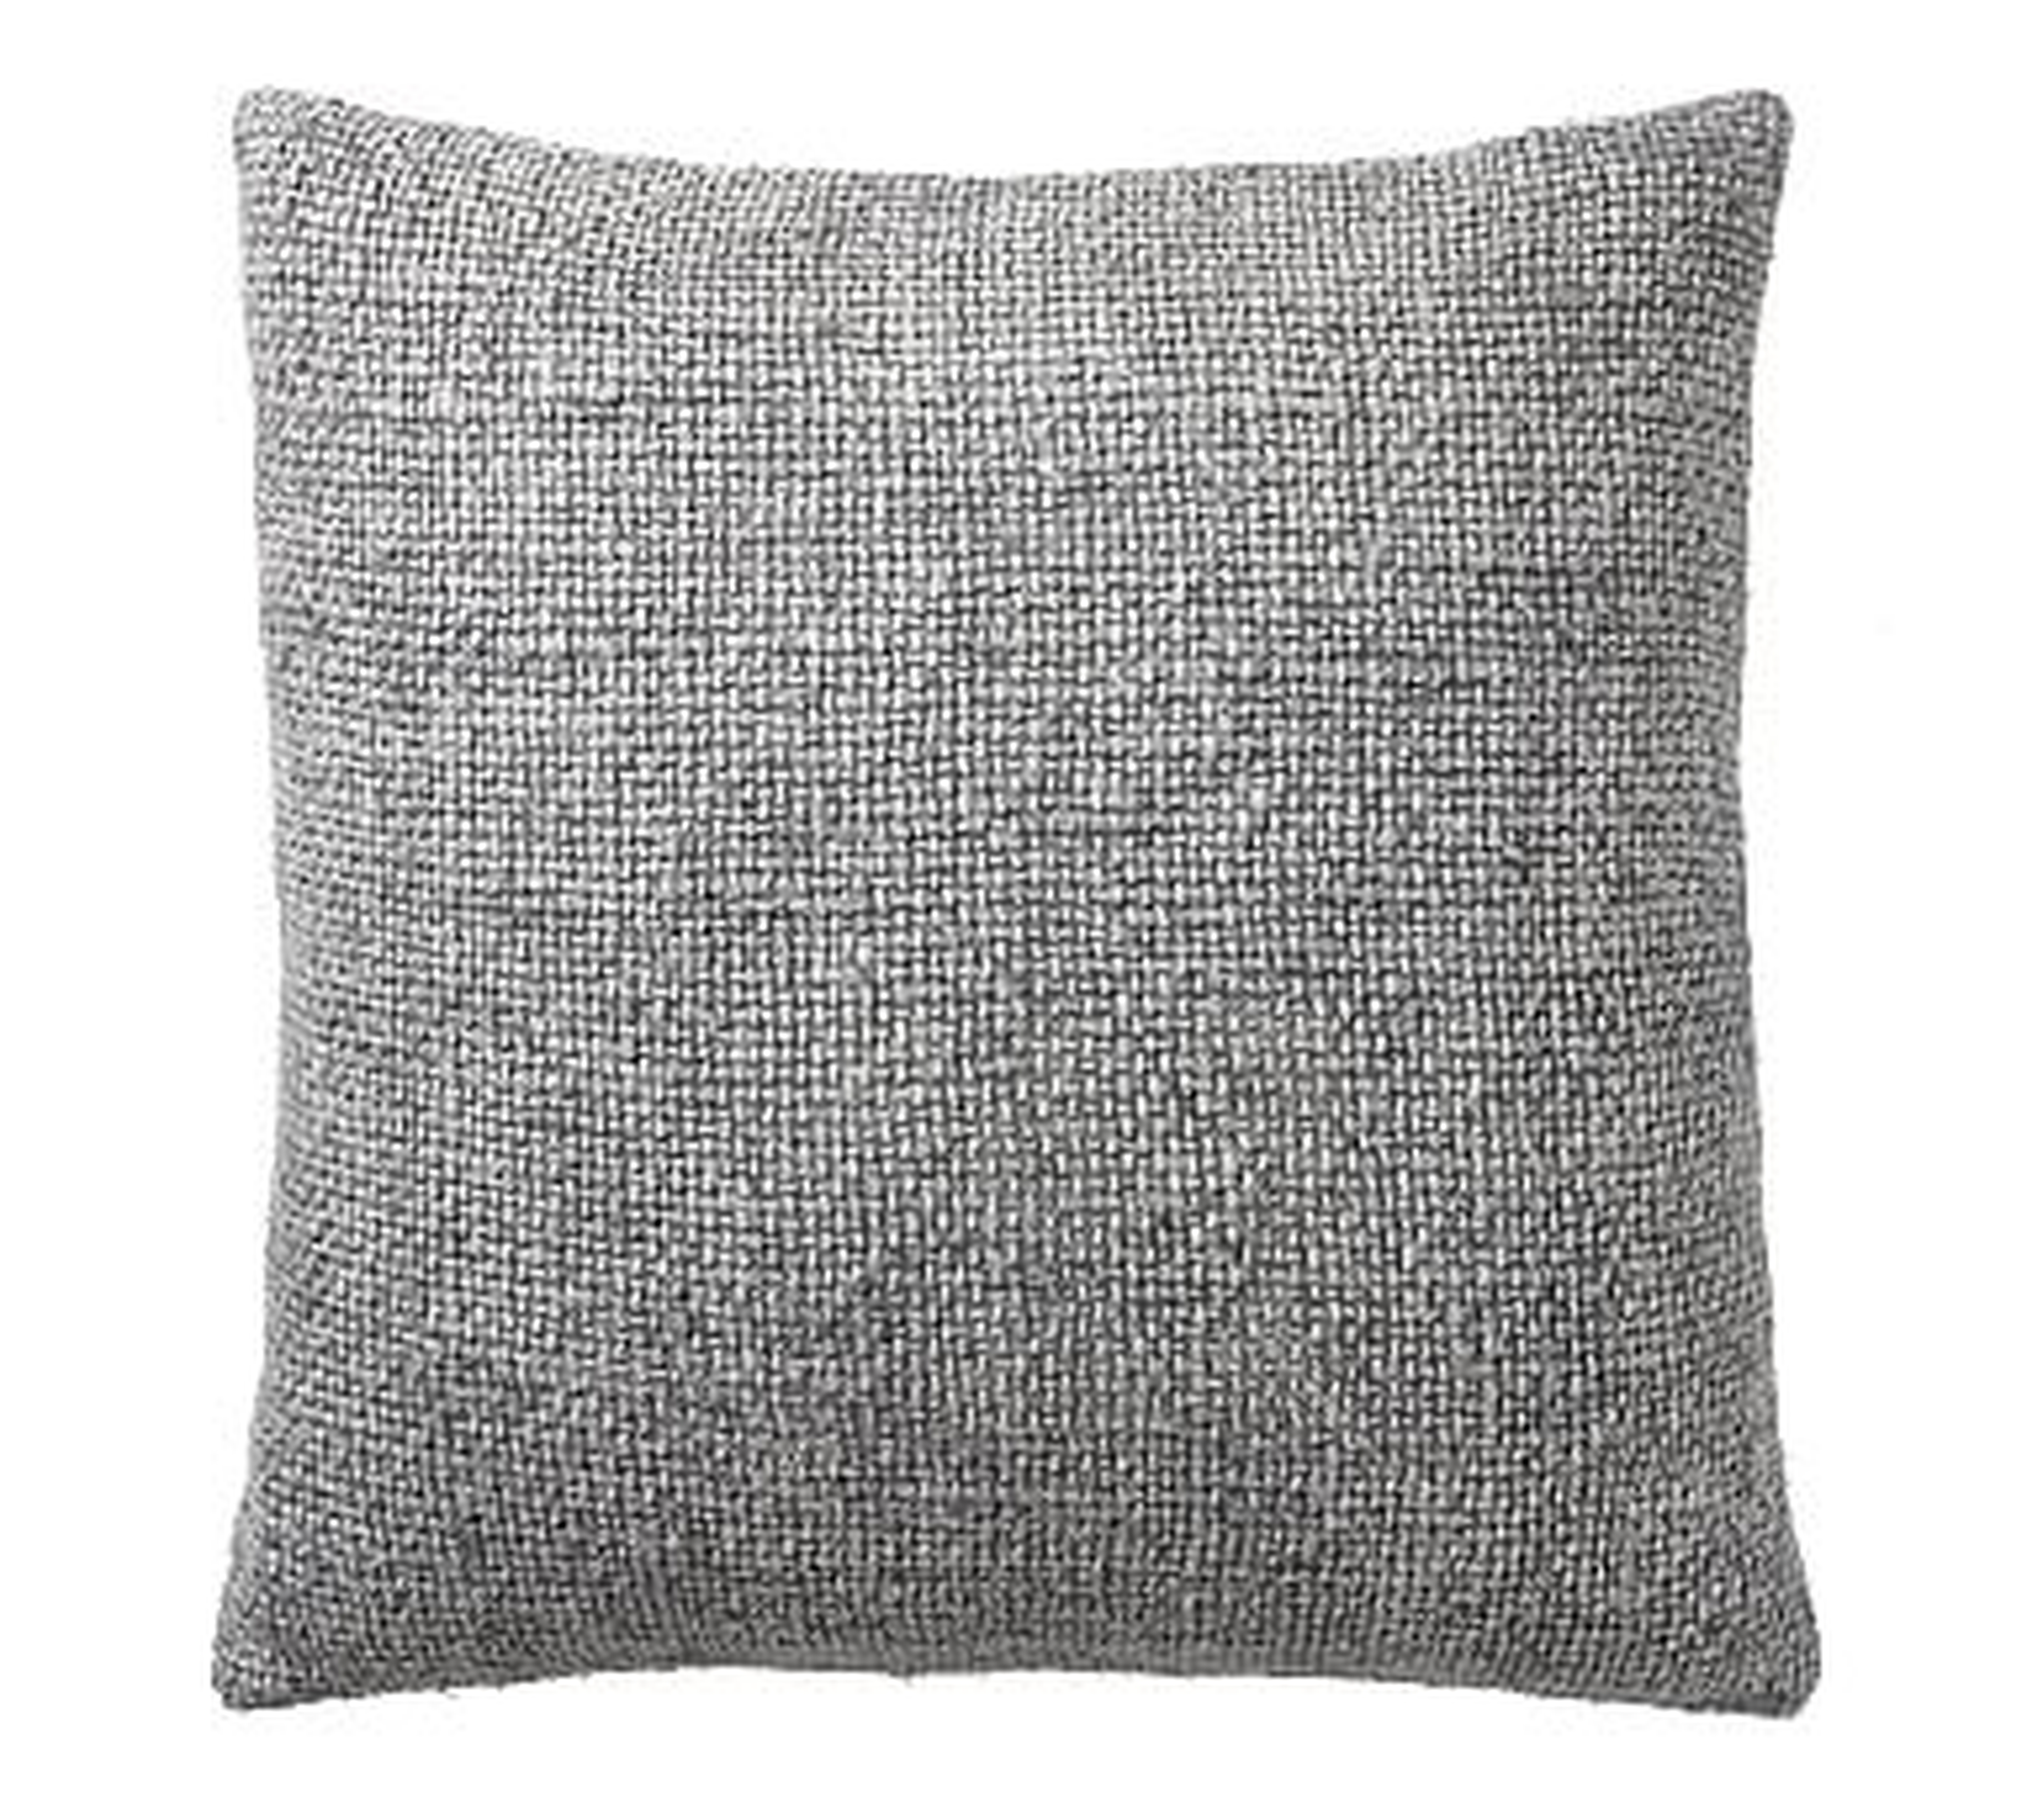 Faye Textured Linen Pillow Cover, 20", Sterling - Pottery Barn